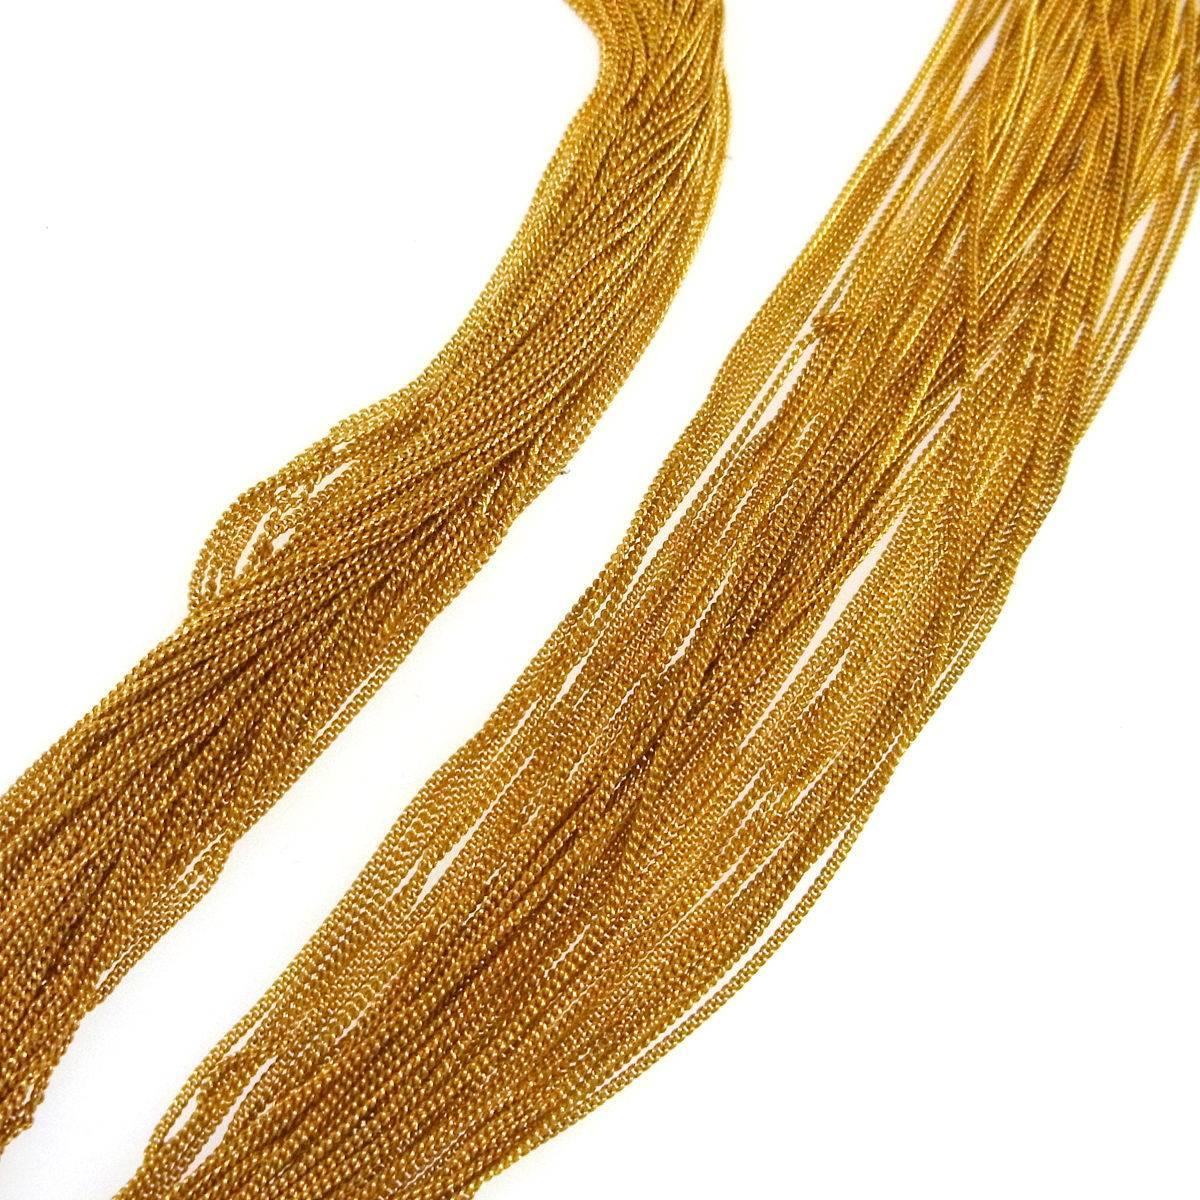 CURATOR'S NOTES

Gucci Gold Multi Strand Bamboo Drape Drop Evening Necklace  

Metal
Gold tone
Bamboo
Lobster claw closure
Made in Italy
Total length 35.5"